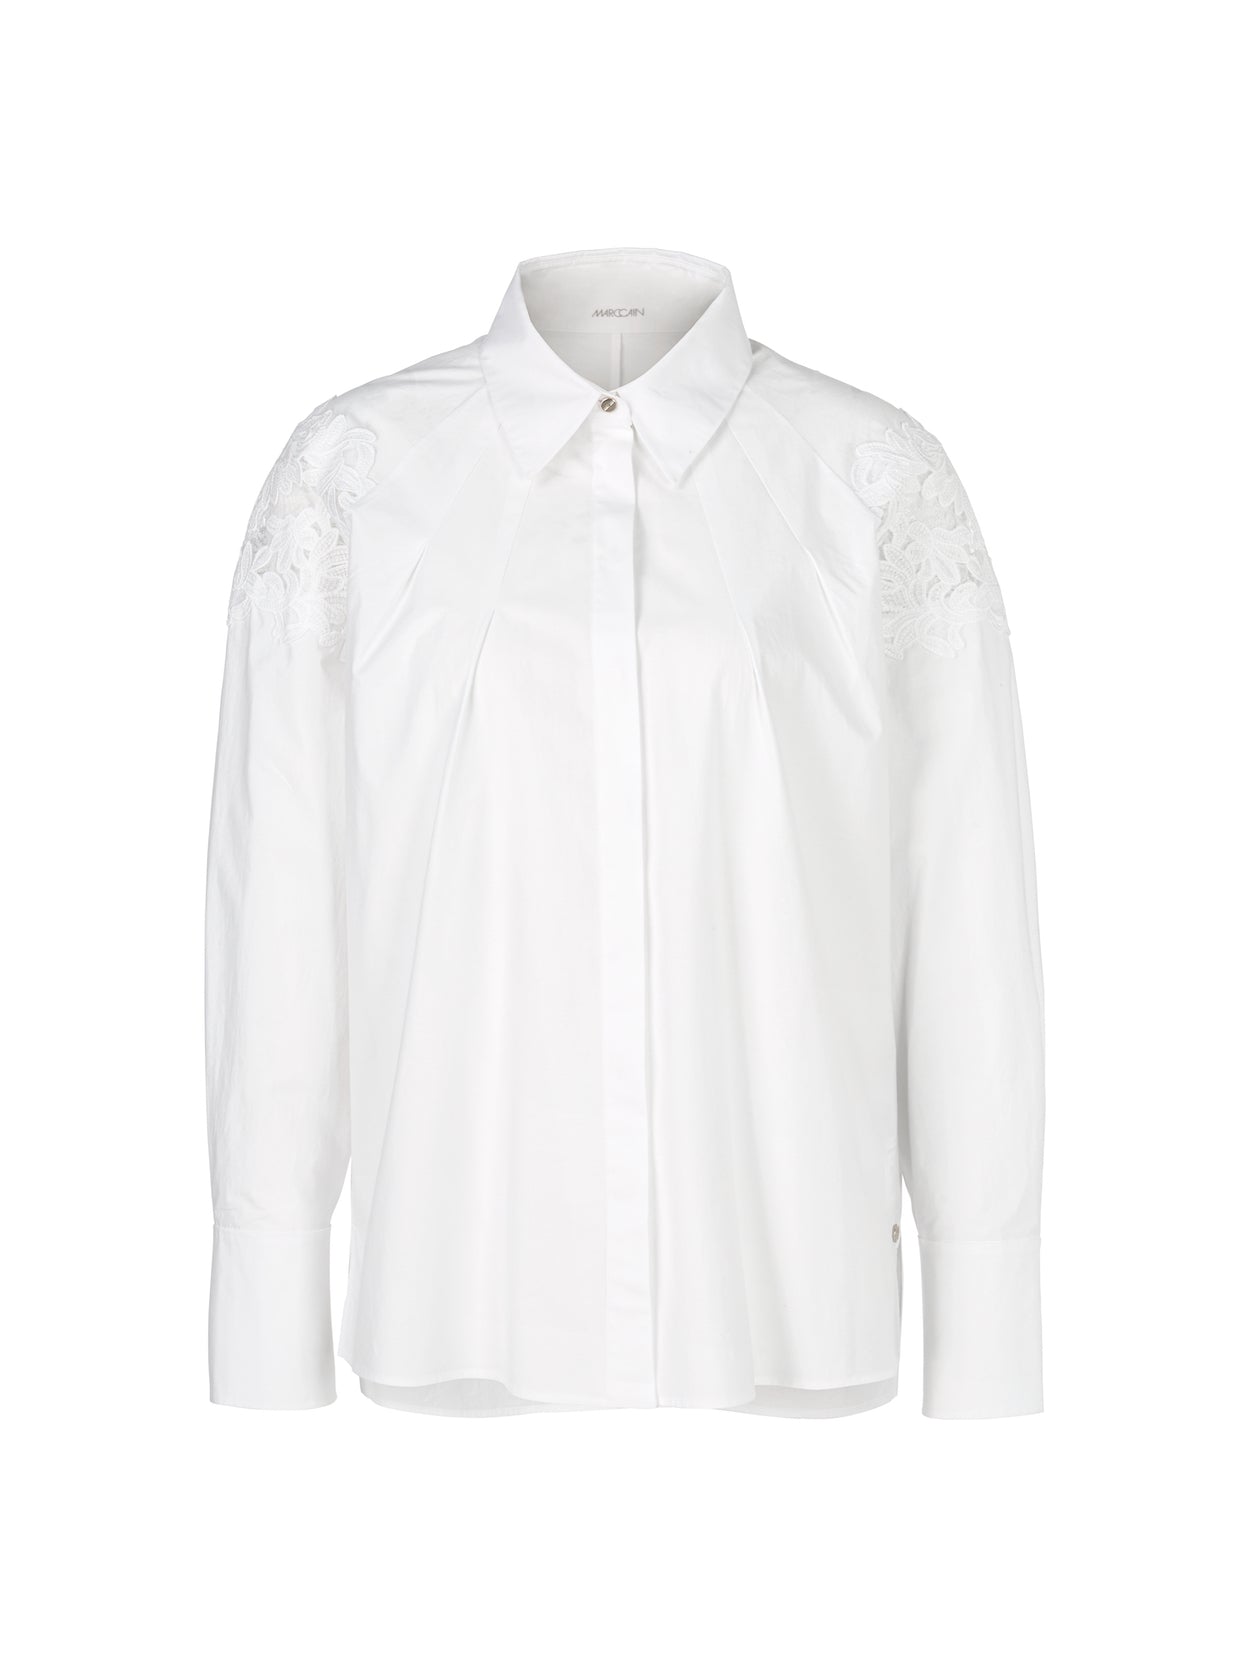 White Lace Insert Pleated Shirt